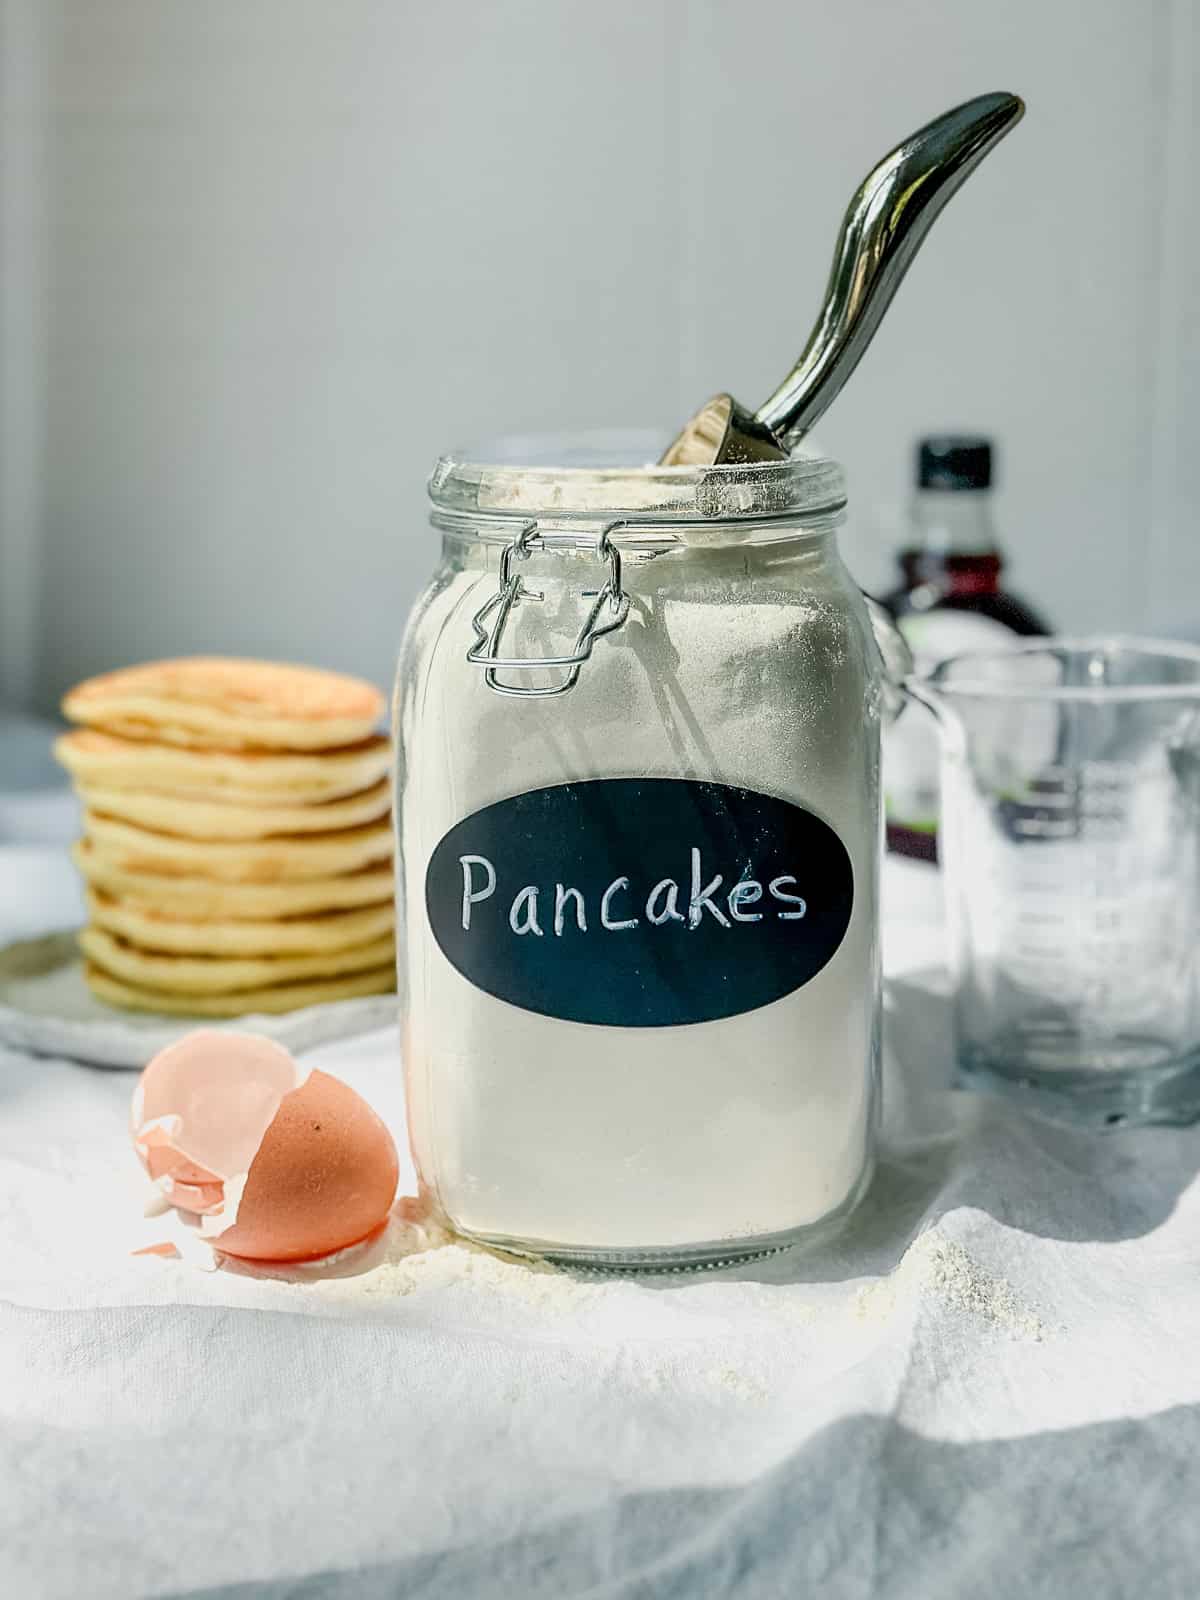 Homemade pancake mix in an airtight container next to a stack of pancakes.